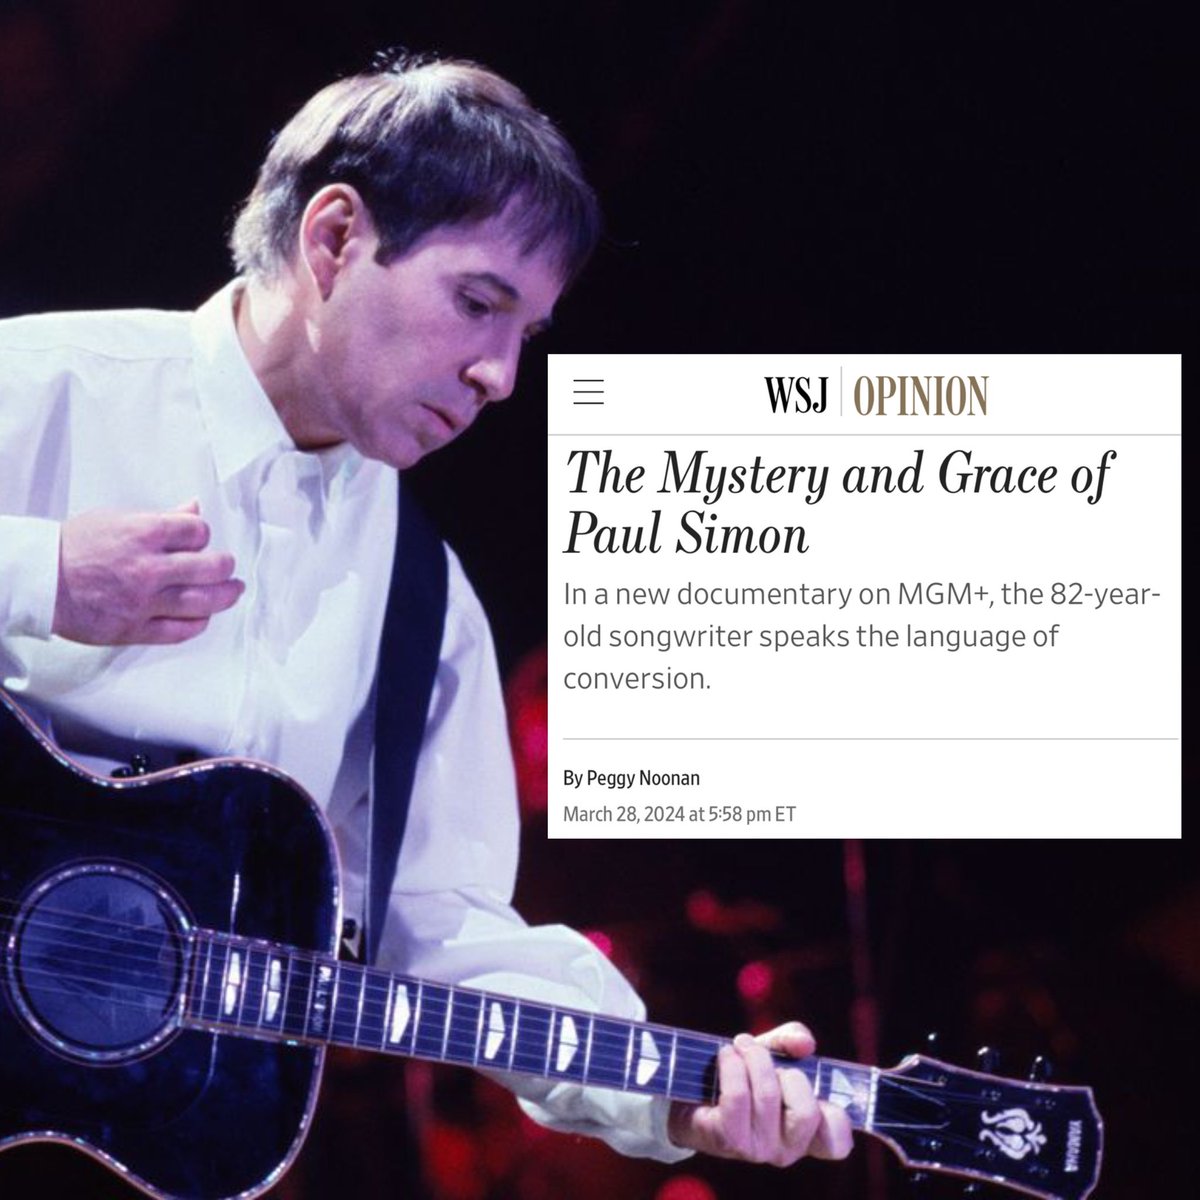 Read more from @WSJopinion about Paul’s latest documentary, #InRestlessDreams: The Music of Paul Simon here: wsj.com/articles/the-m… 📷: Guido Harari/MGM+